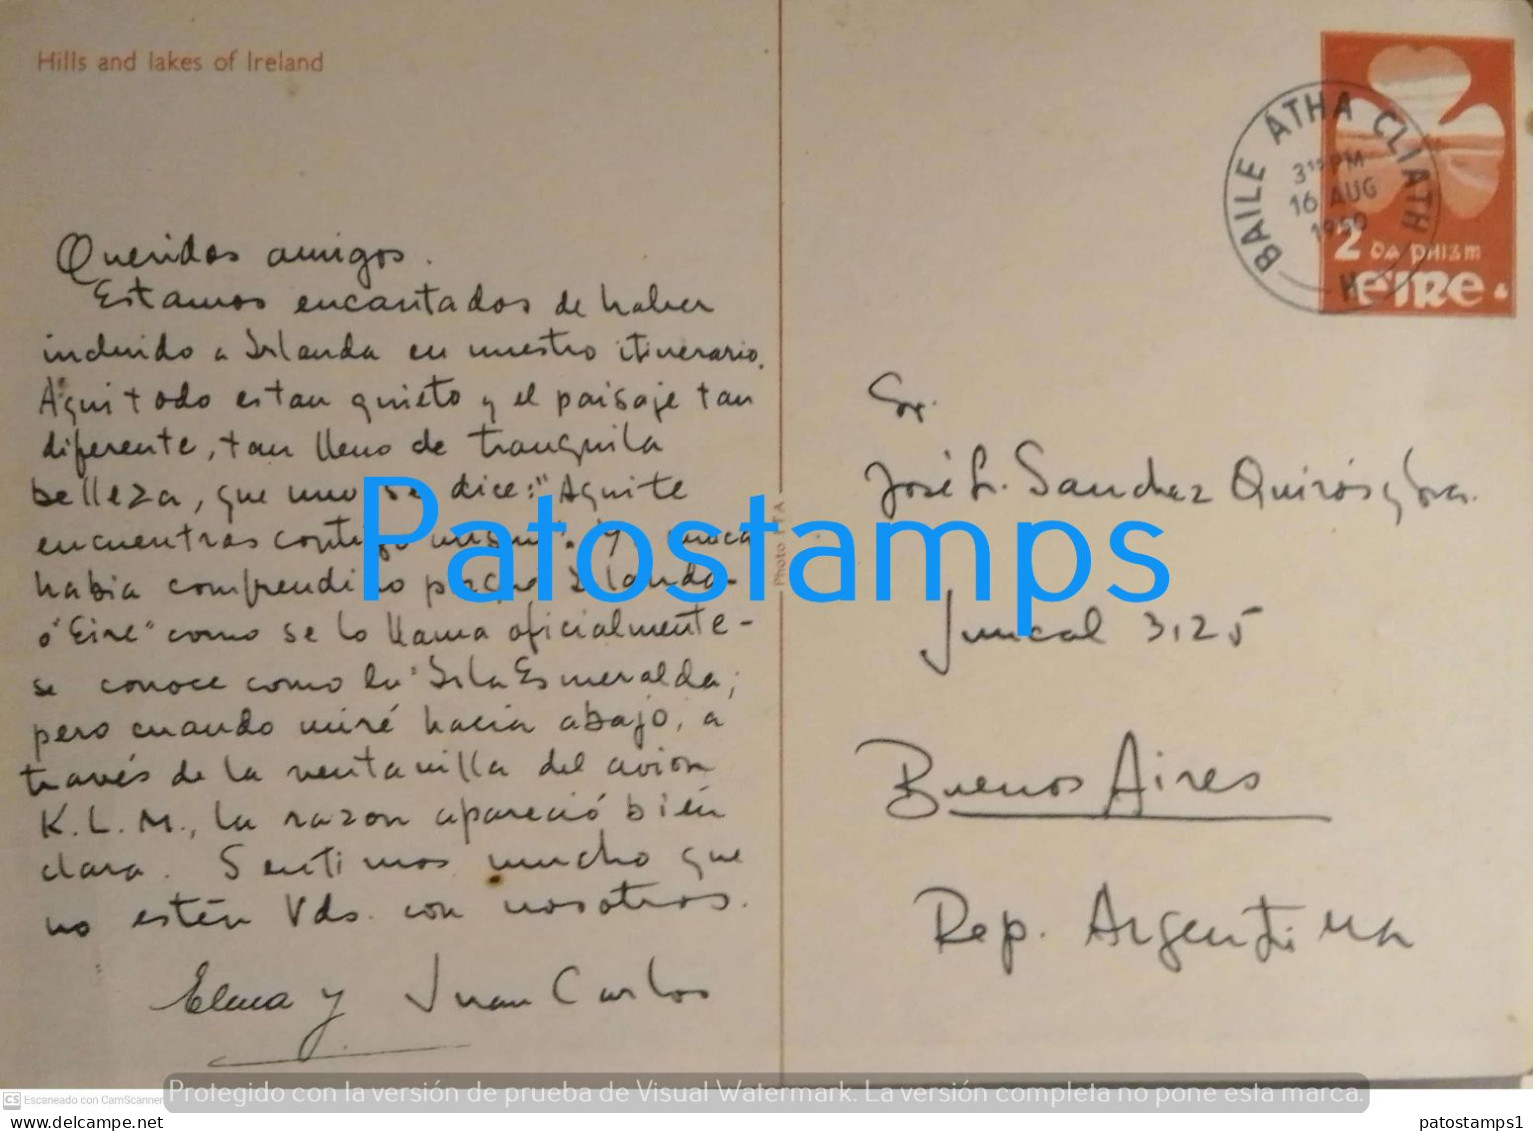 204102 IRELAND HILLS AND LAKES YEAR 1950 CIRCULATED TO ARGENTINA POSTAL SATIONERY POSTCARD - Postal Stationery